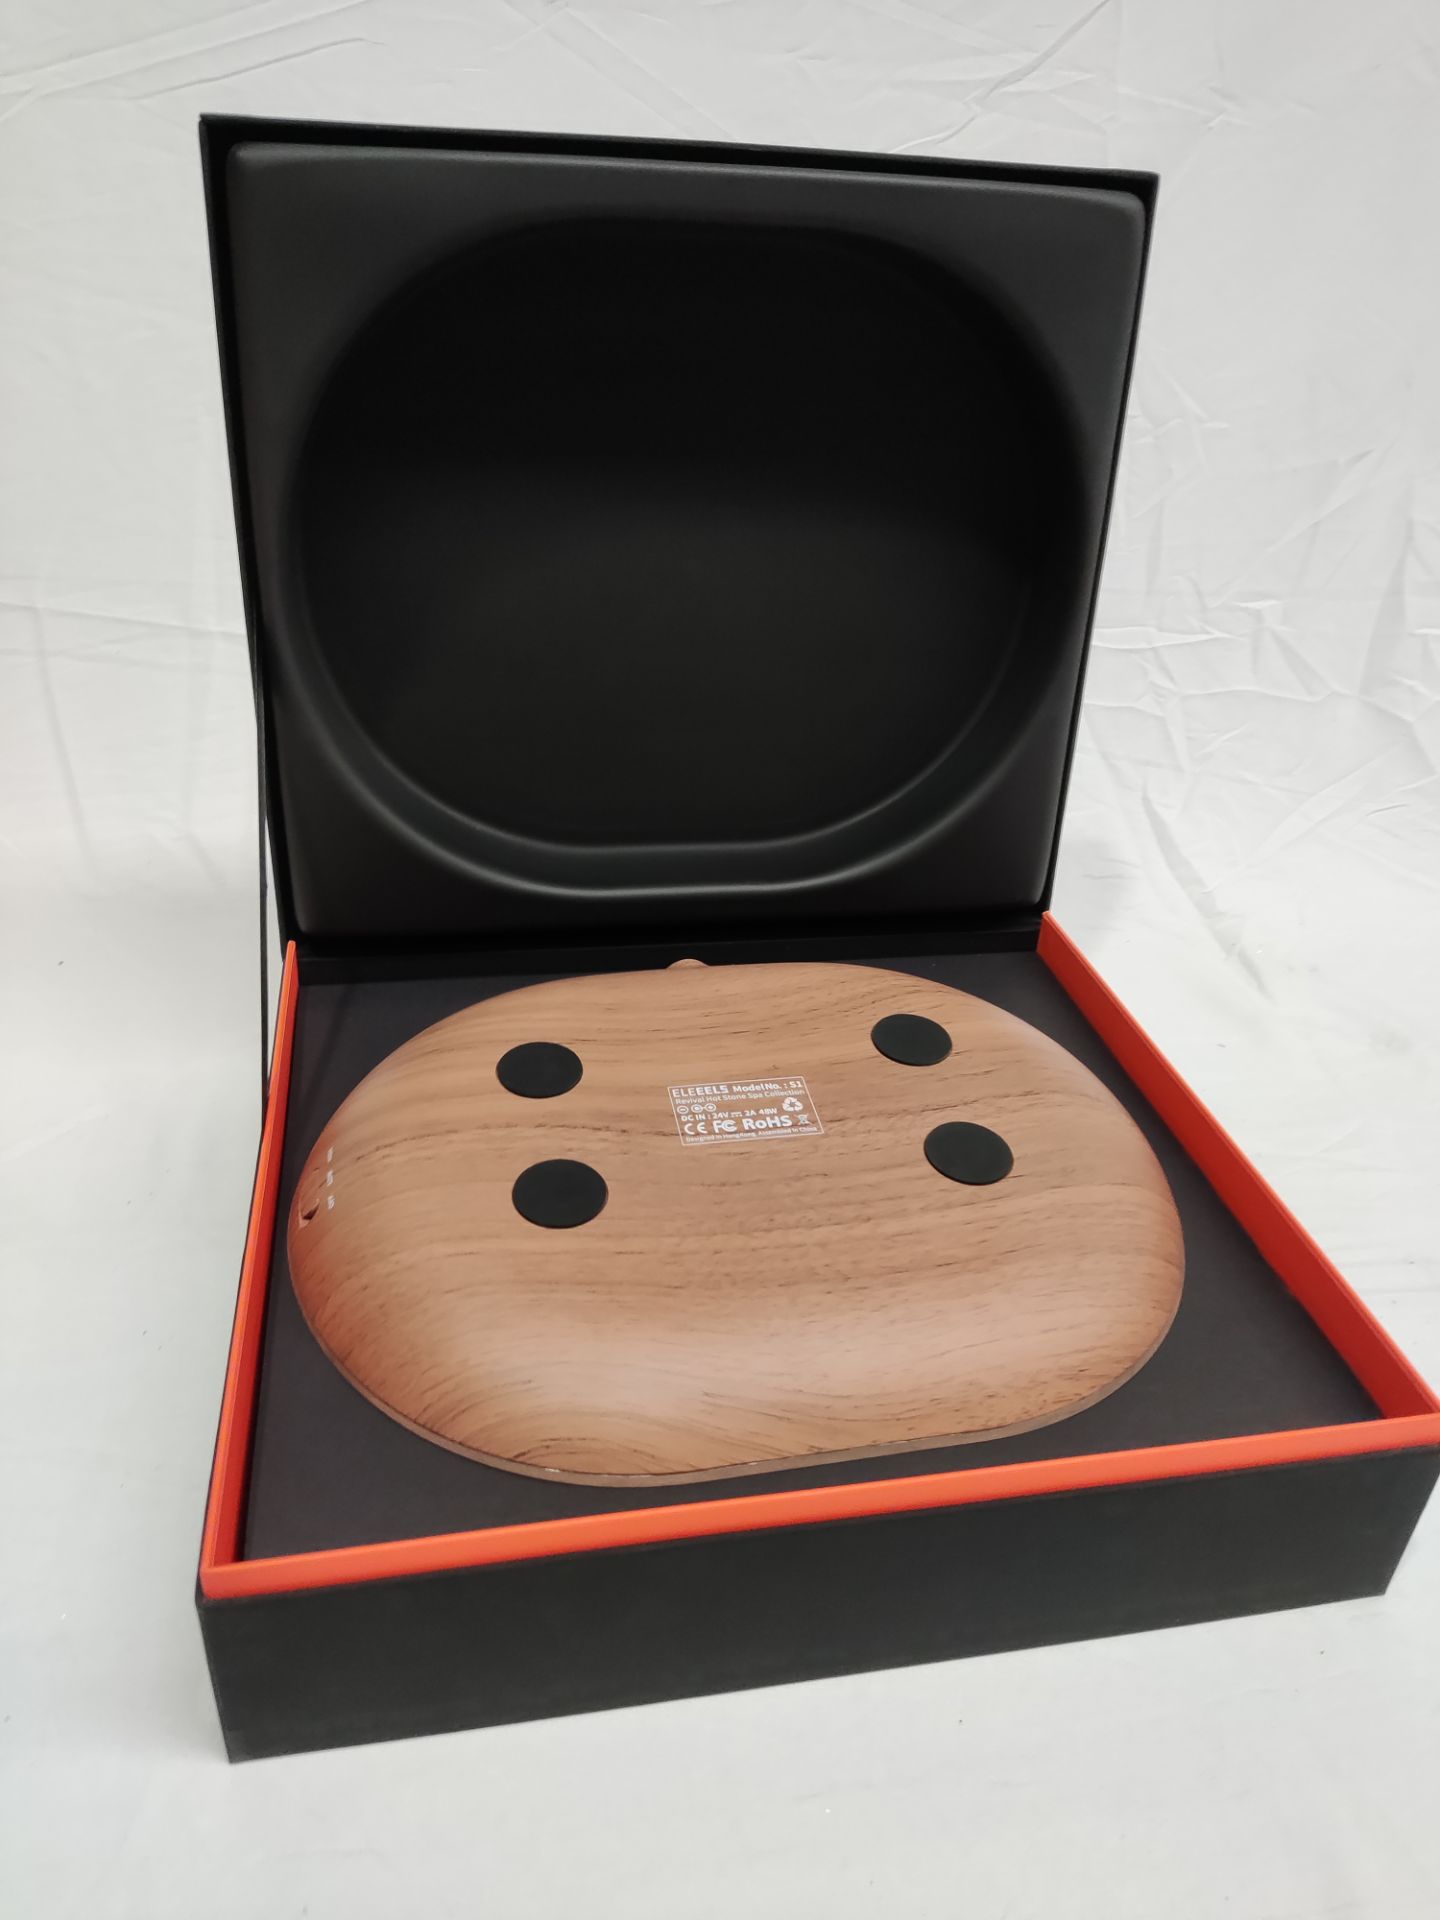 1 x ELEEELS Eleeels S1 Revival Hot Stone Spa Collection - New/Boxed - Original RRP £349 - Ref: - Image 7 of 16